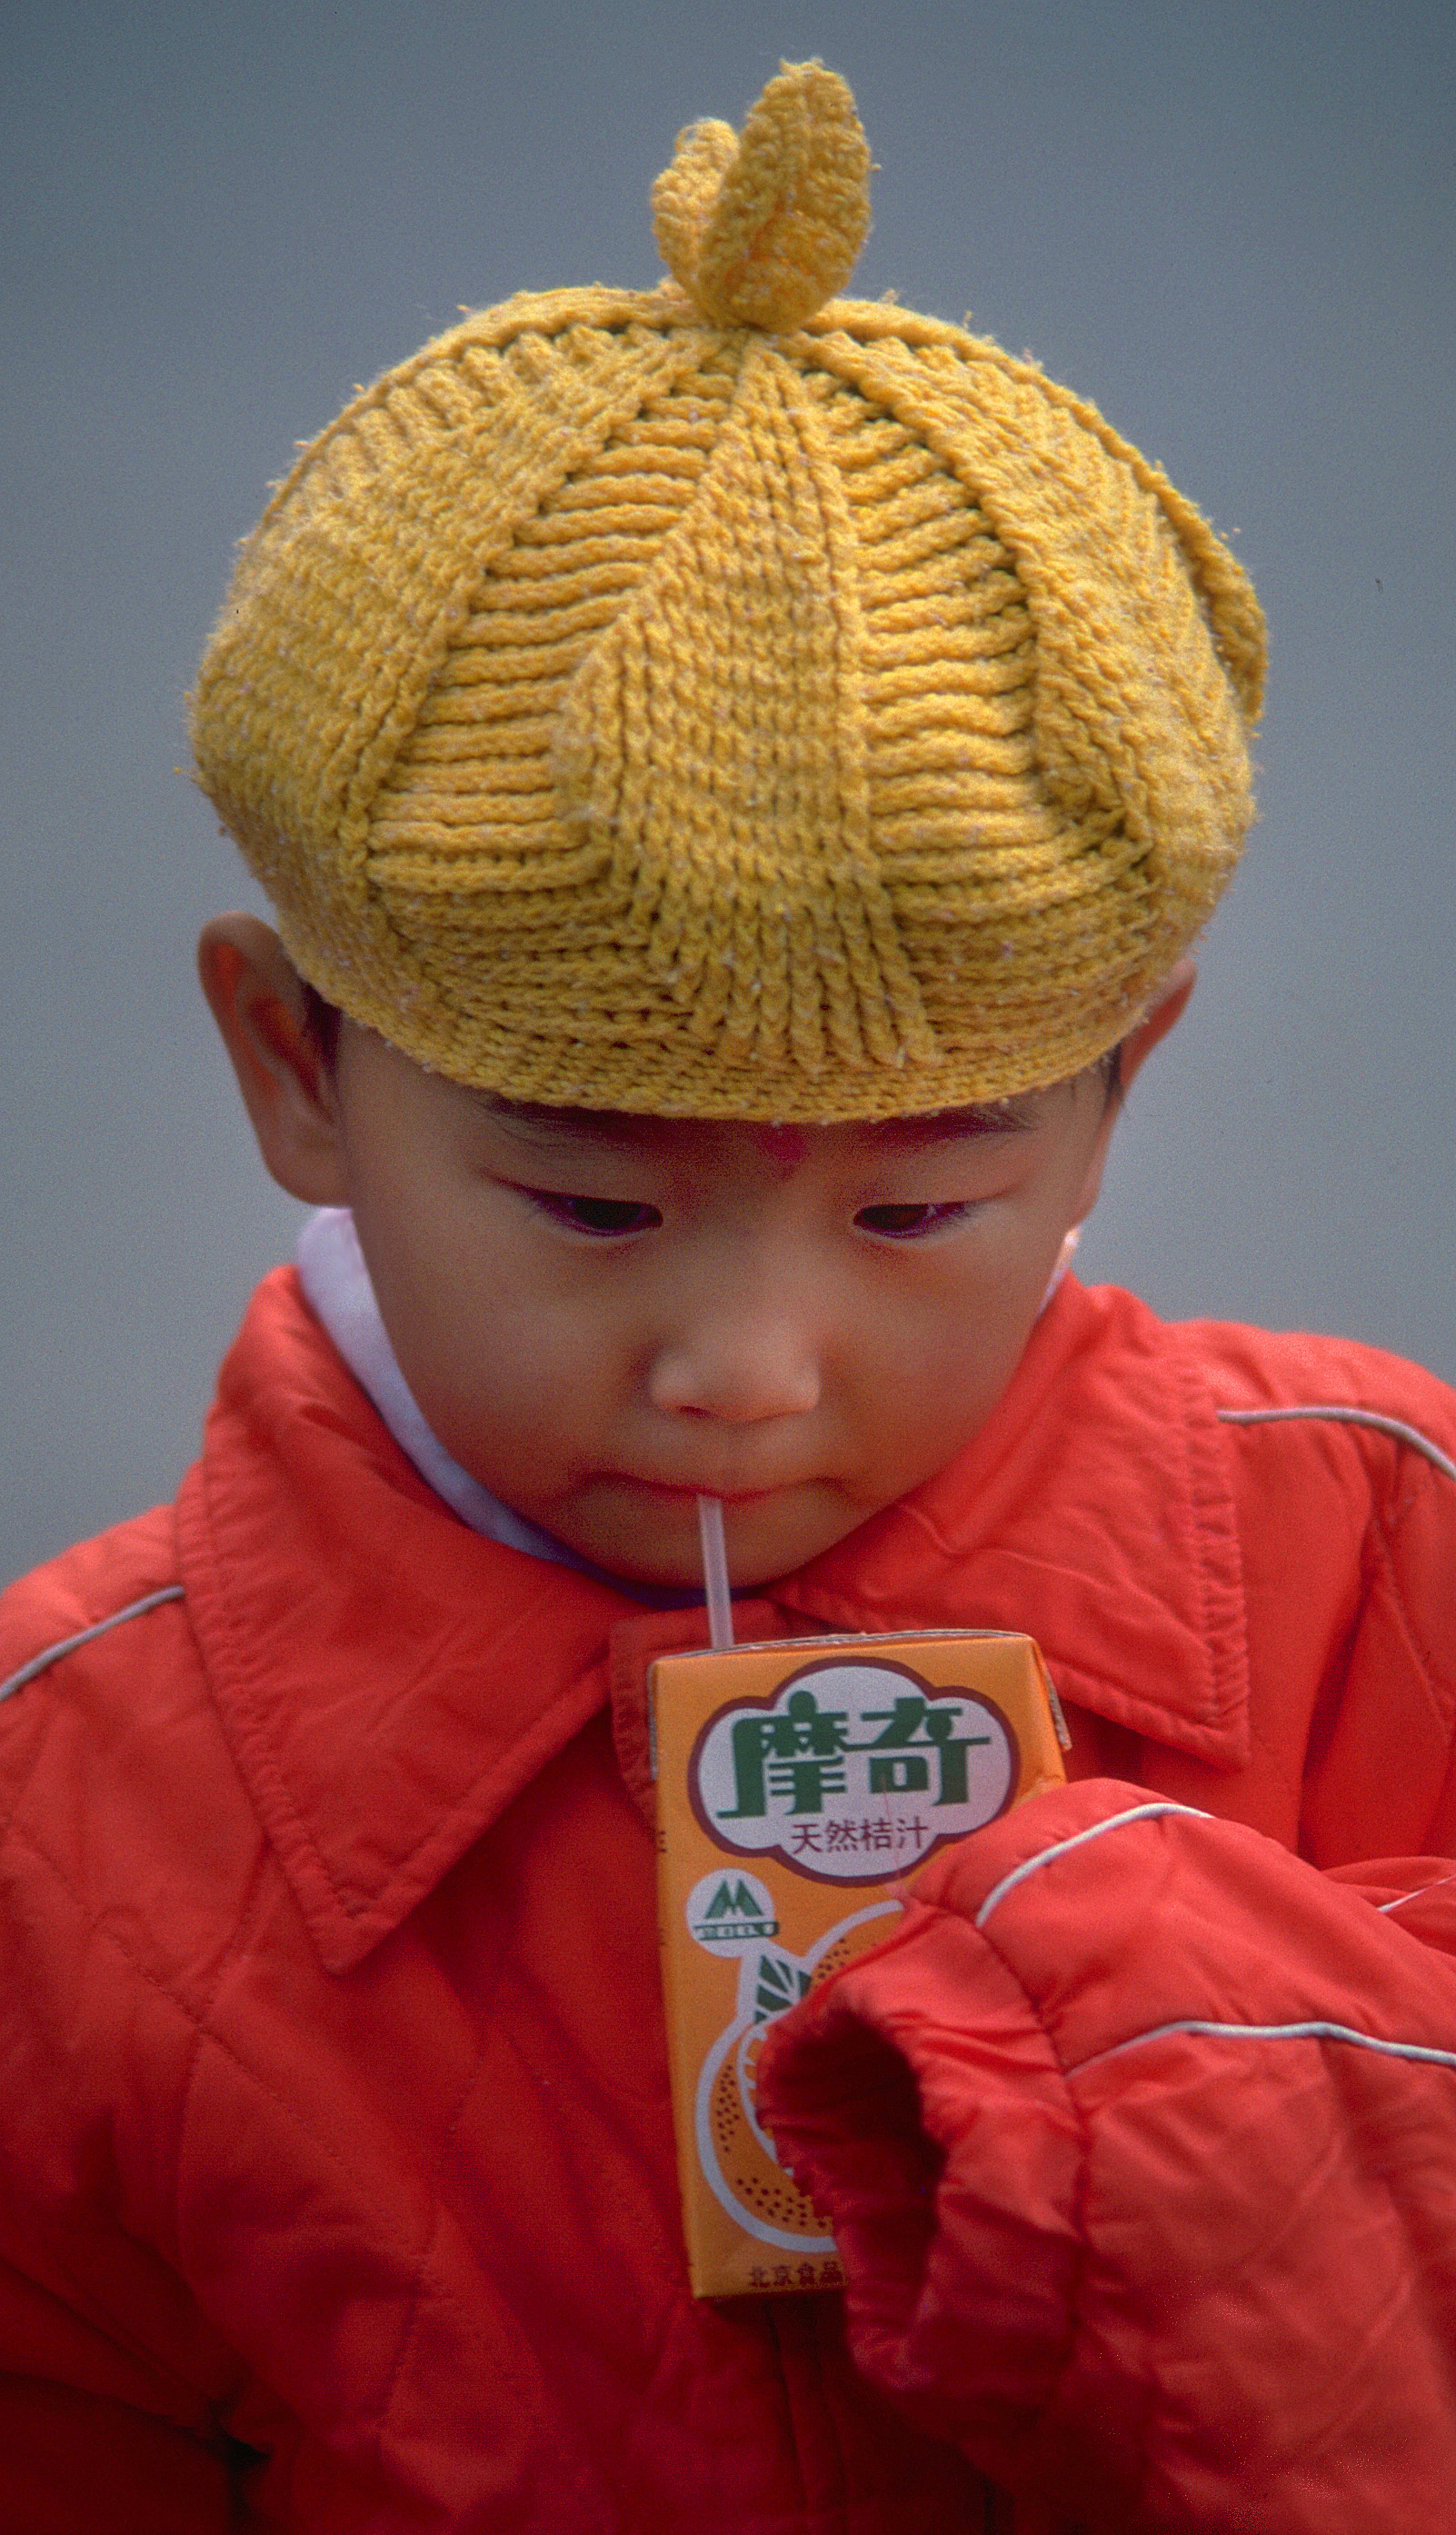 Chinese child drinking from juicebox